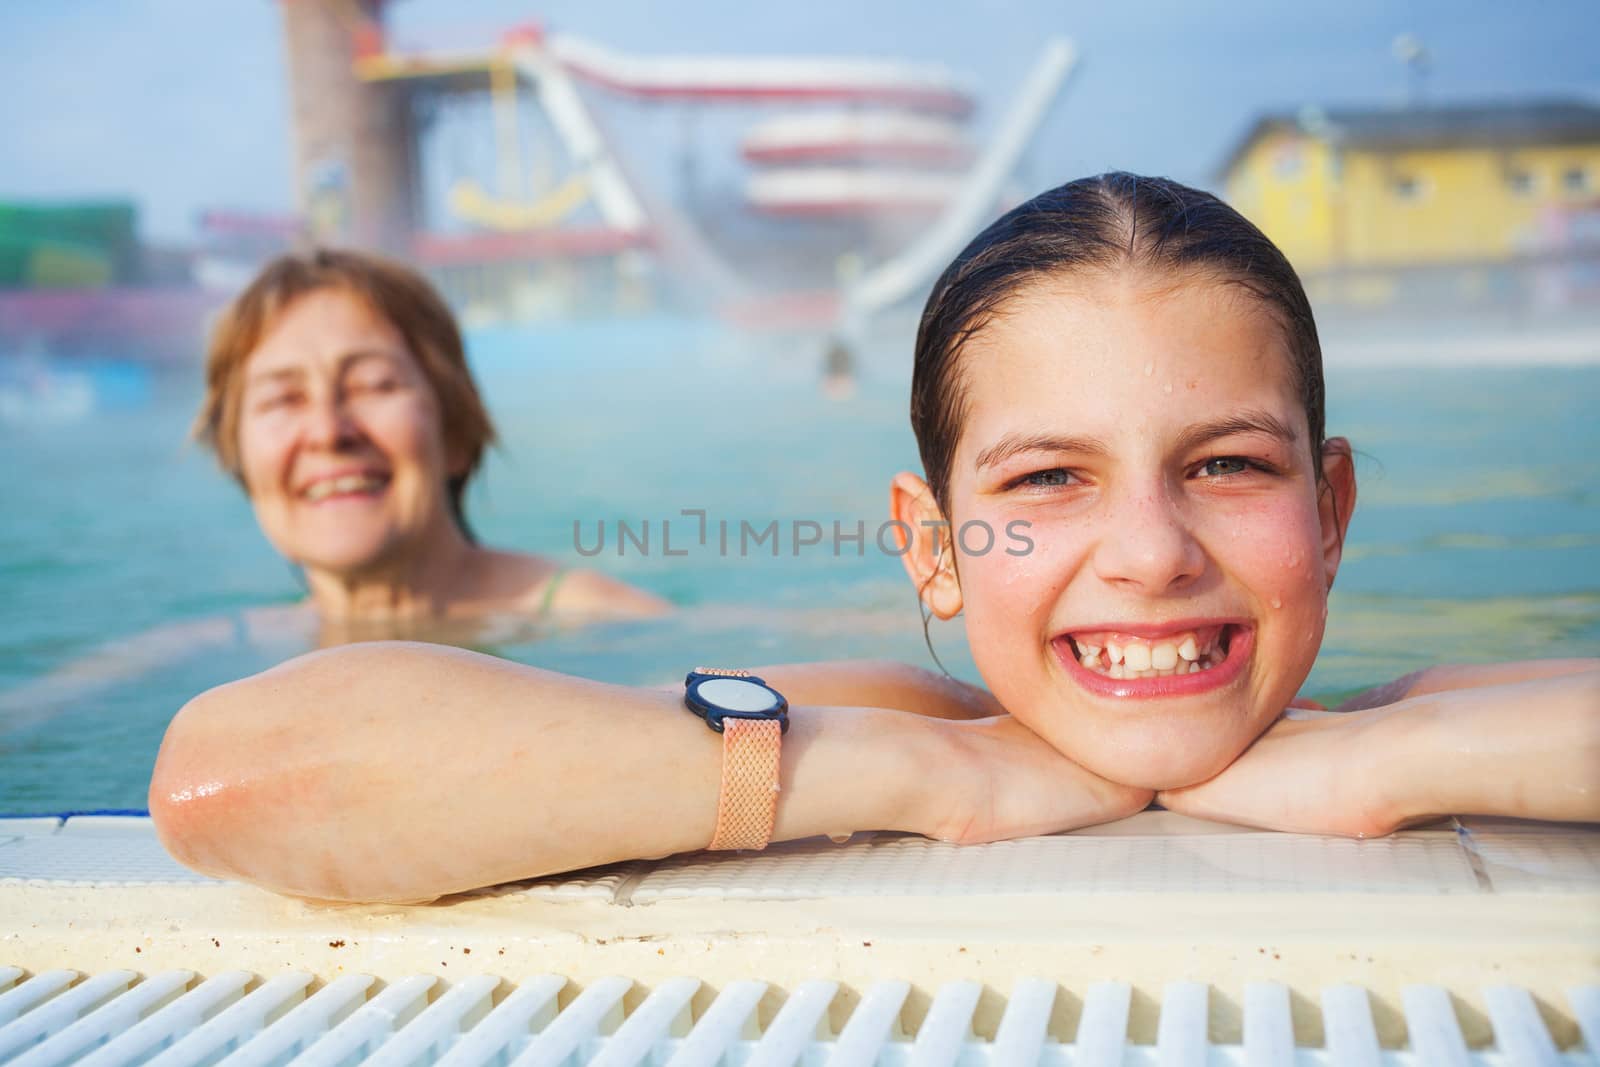 Activities on the pool. Portrait of cute girl with grandmother relaxing in termal swimming pool